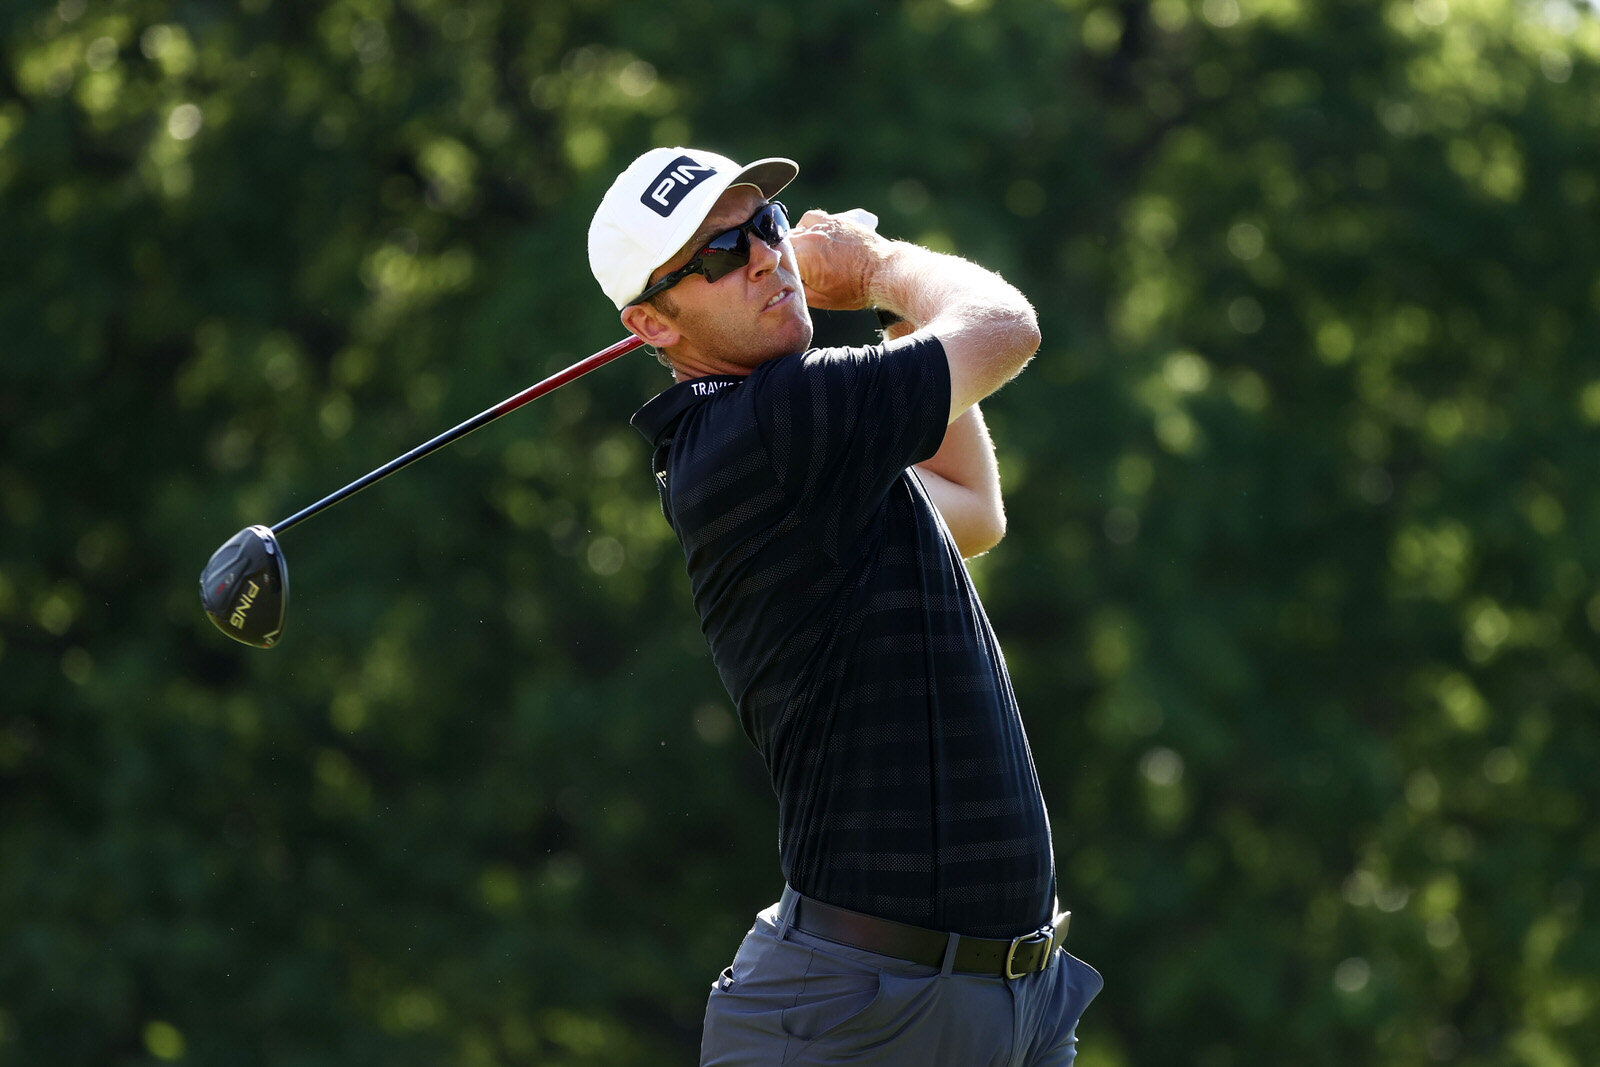  DETROIT, MICHIGAN - JULY 04: Seamus Power of Ireland plays his shot from the 18th tee during the third round of the Rocket Mortgage Classic on July 04, 2020 at the Detroit Golf Club in Detroit, Michigan. (Photo by Gregory Shamus/Getty Images) 